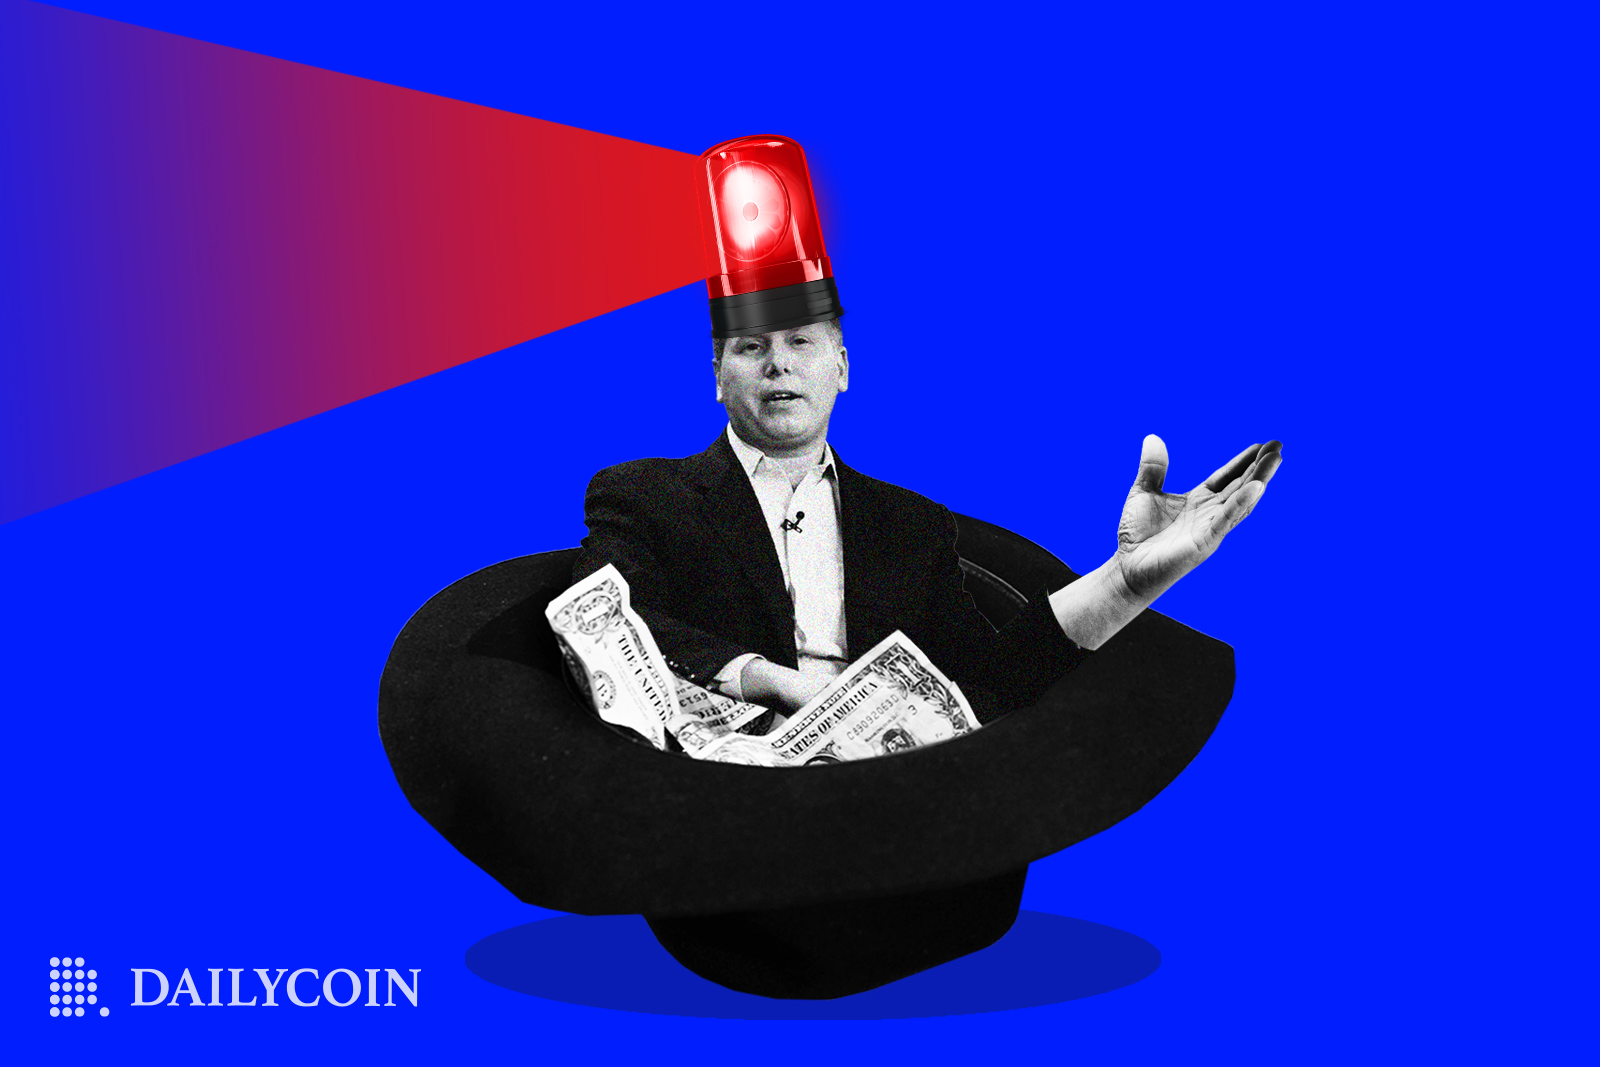 Barry Silbert with a red police siren on his head is sitting in a black cap full of dollars